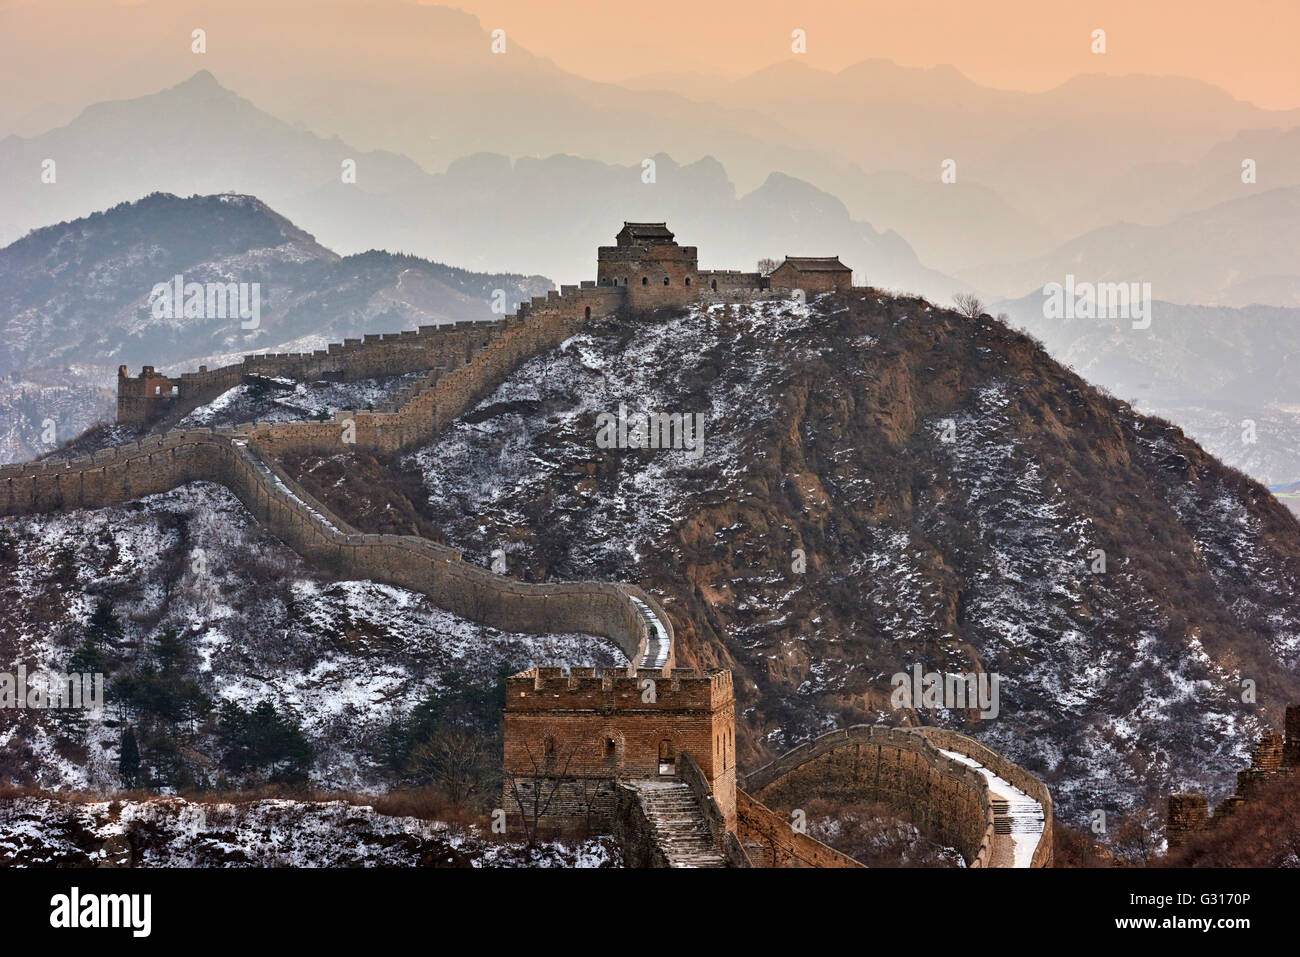 China, Hebei province, Great Wall of China, Jinshanling and Simatai section, Unesco World Heritage Stock Photo